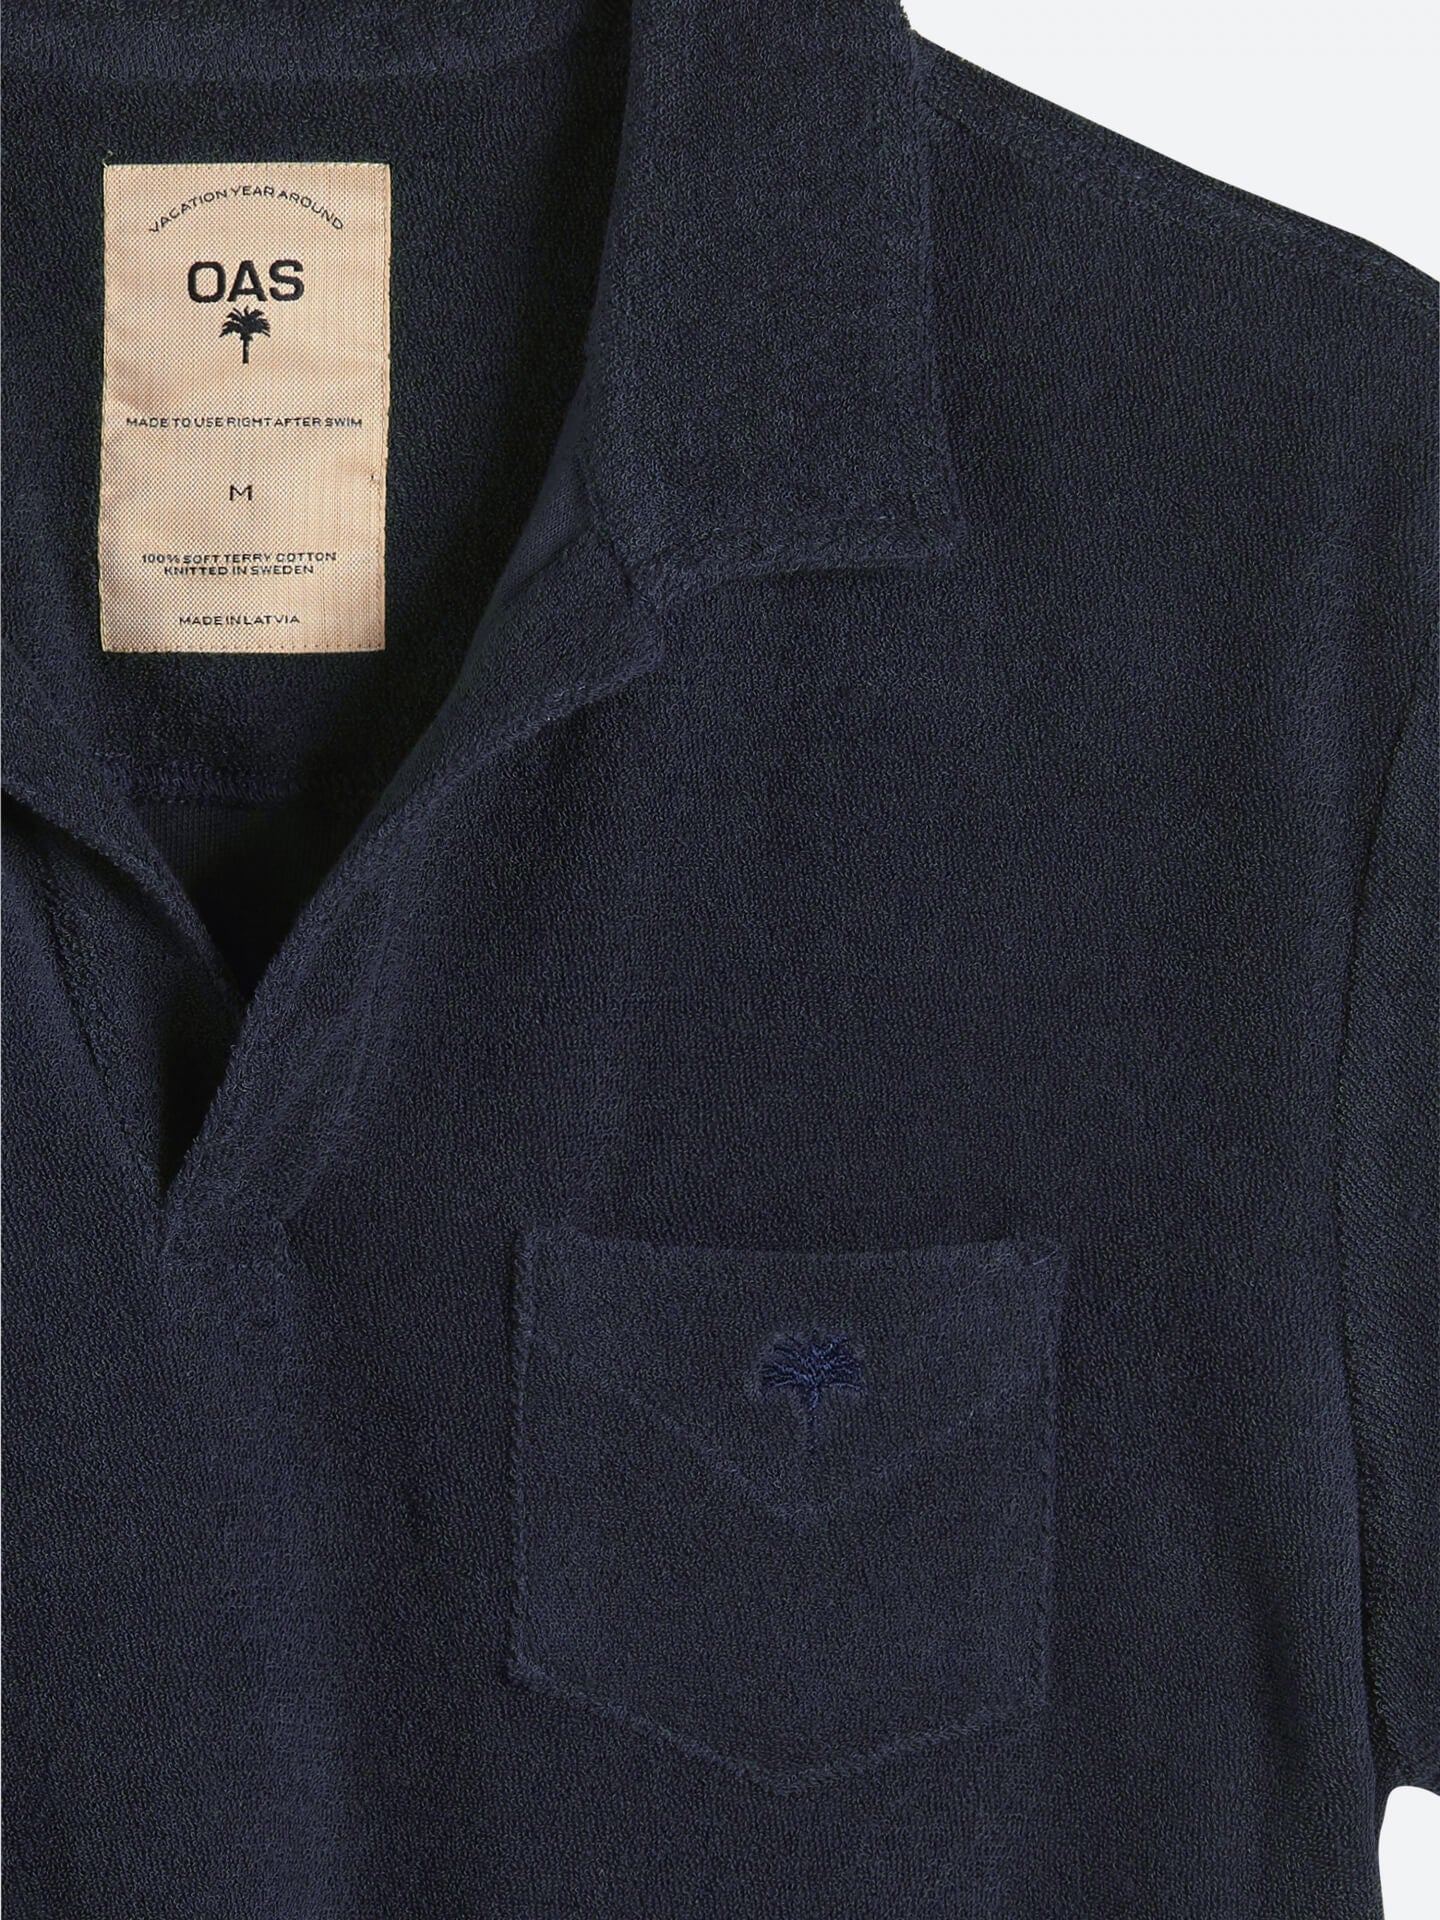 Oas Solid Navy Terry Shirt - Mojo Independent Store